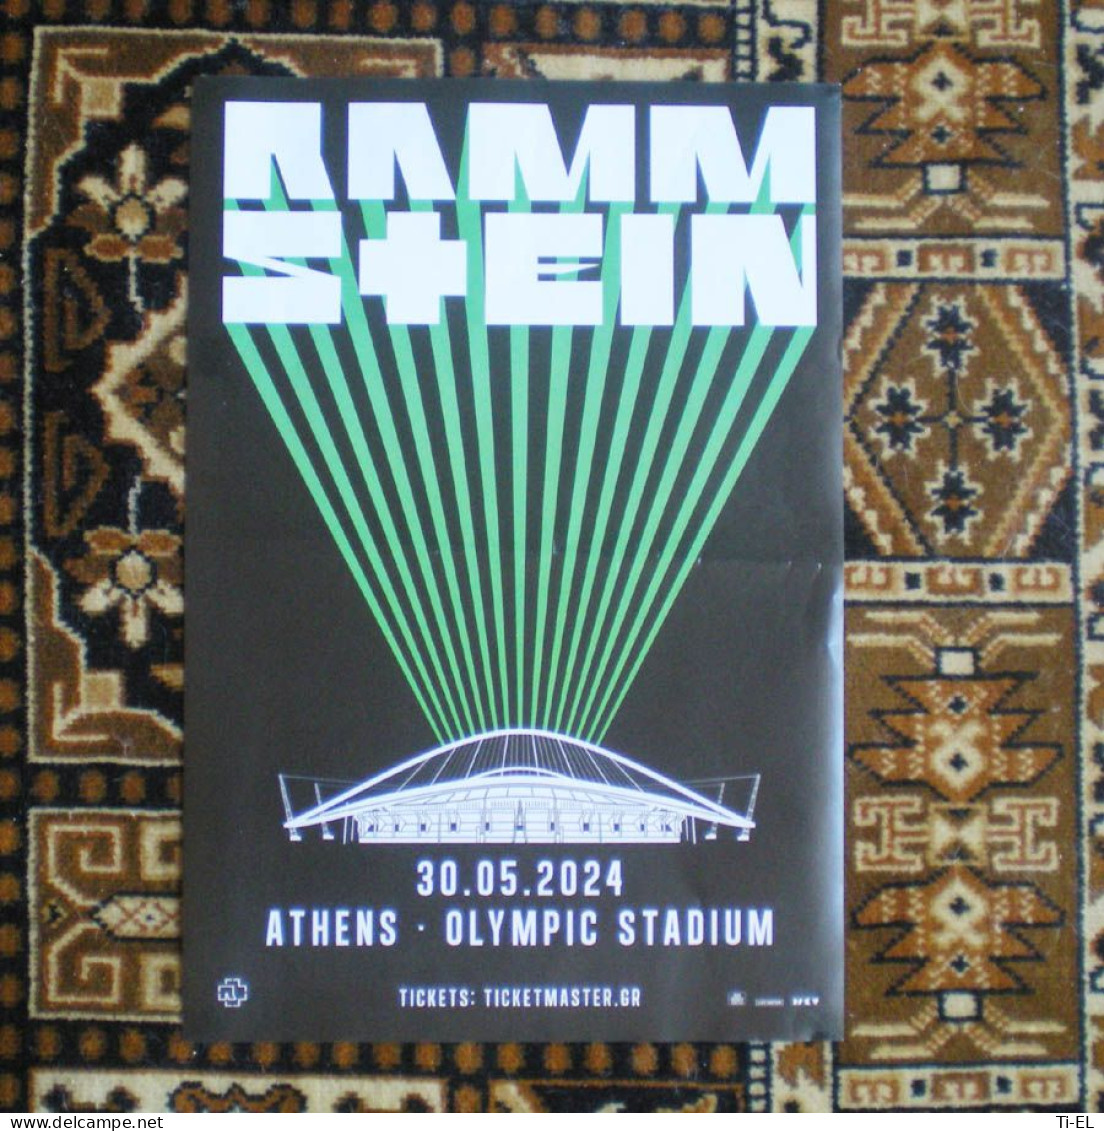 RAMMSTEIN: Original Poster (NEW EDITION) For Their Forthcoming Concert In Athens, Greece On 30.May.2024 - Afiches & Pósters